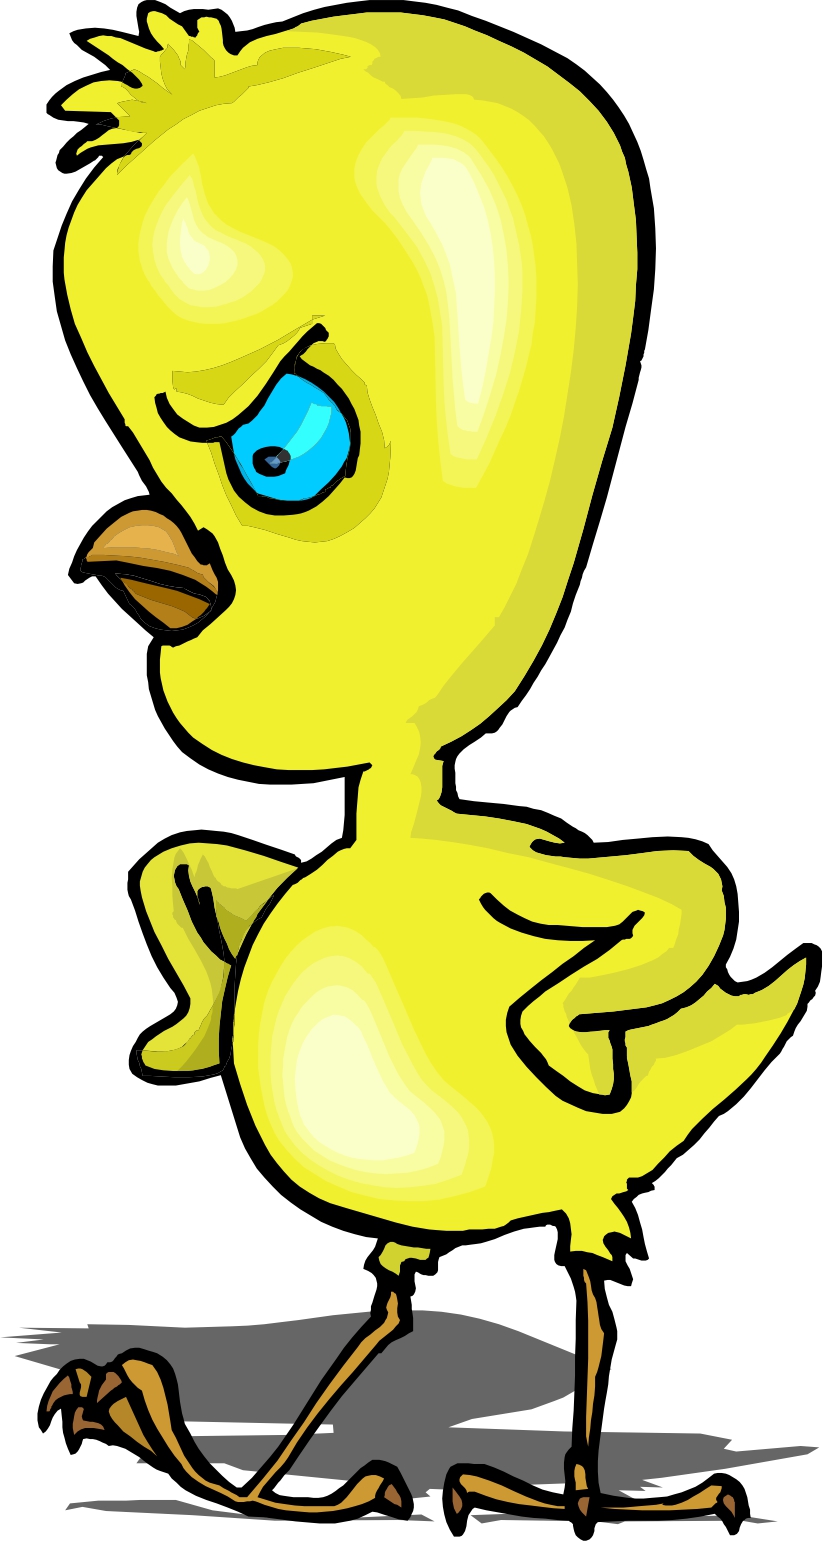 Cartoon Angry Chicken - ClipArt Best